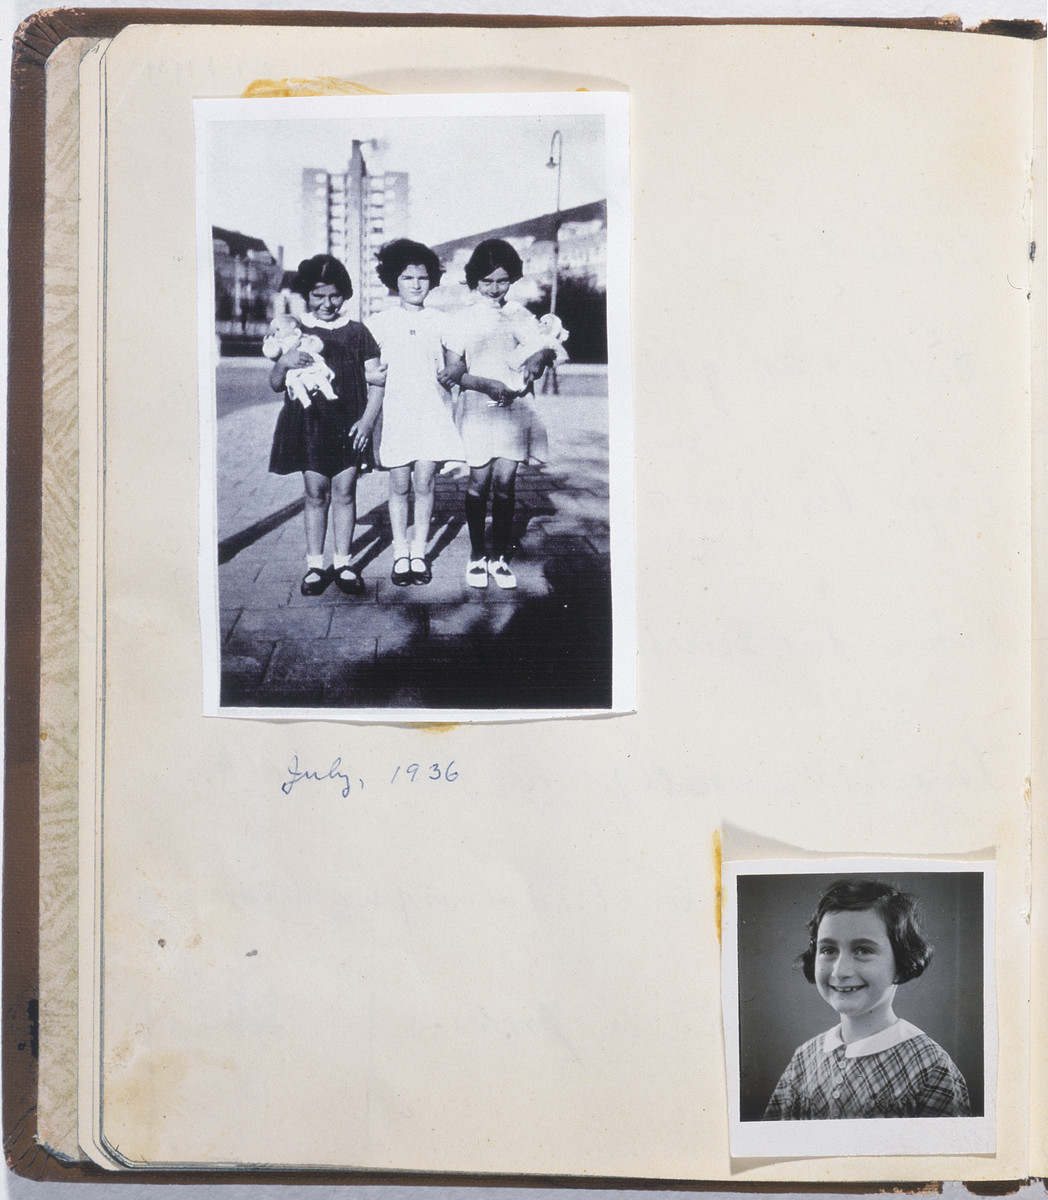 One page from a "Posie book" or autograph album that belonged to Eva Goldberg Judd (donor's wife).

The page  features  a small photograph of Anne Frank.  The album contains inscriptions from friends and family.  The contents of the autograph book were collected by Eva Goldberg prior to her emigration from Germany to the United States via the Netherlands and Great Britain.